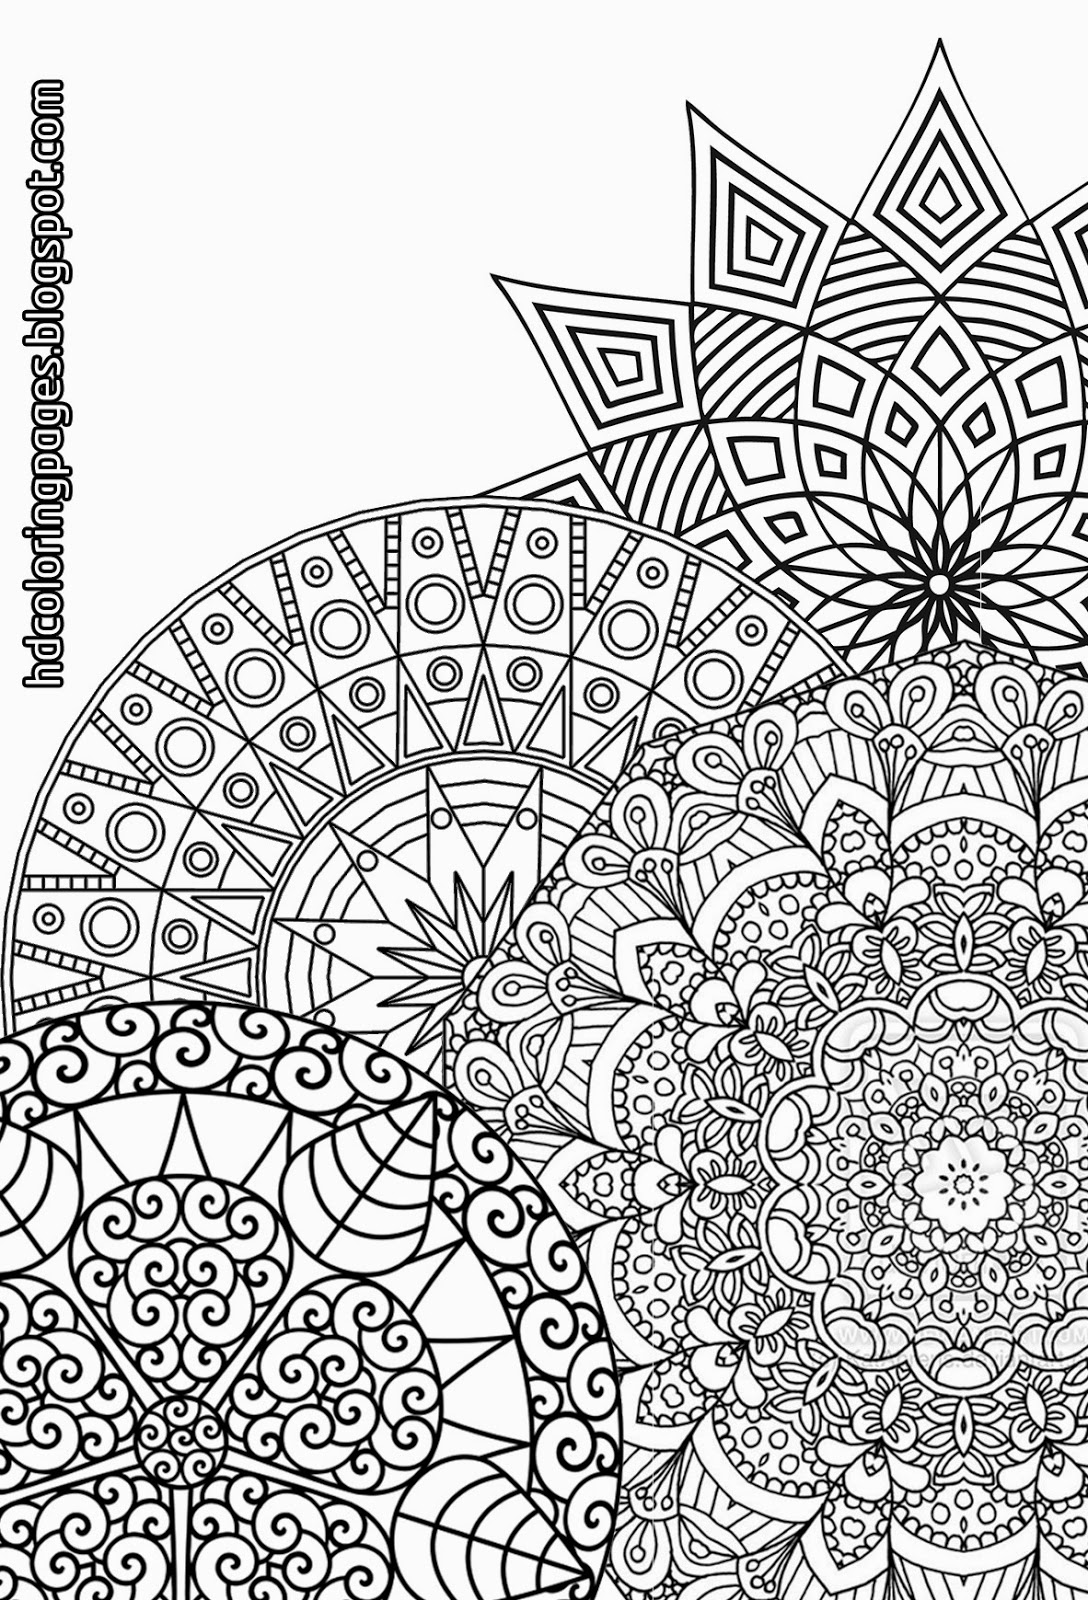 1000 images about icolor mandalas on pinterest on mandela coloring pages id=33907